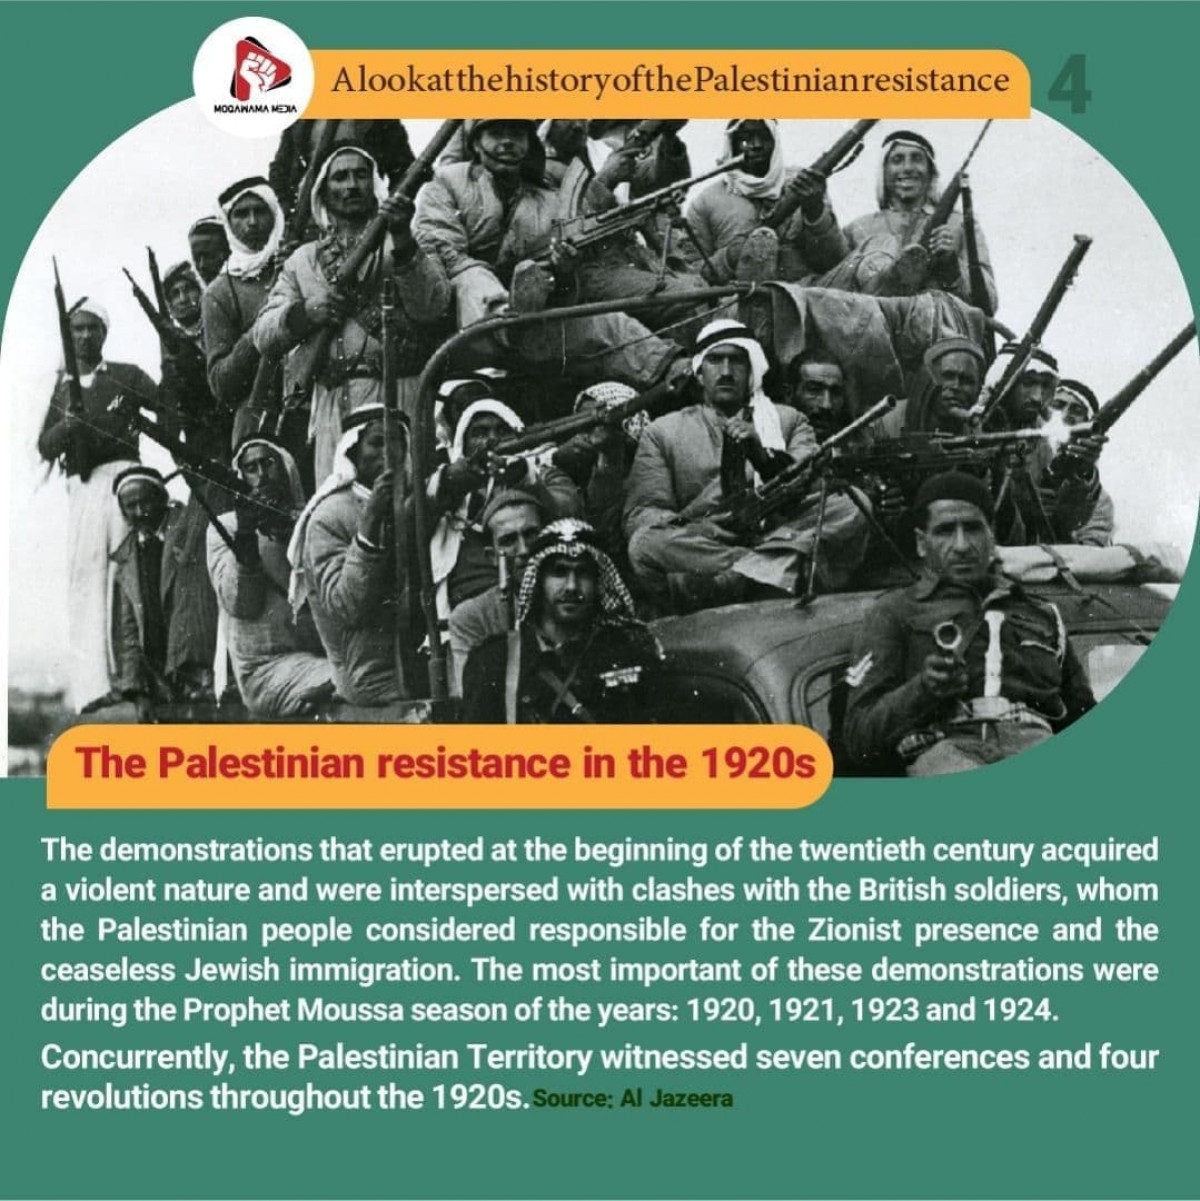 The Palestinian resistance in the 1920s